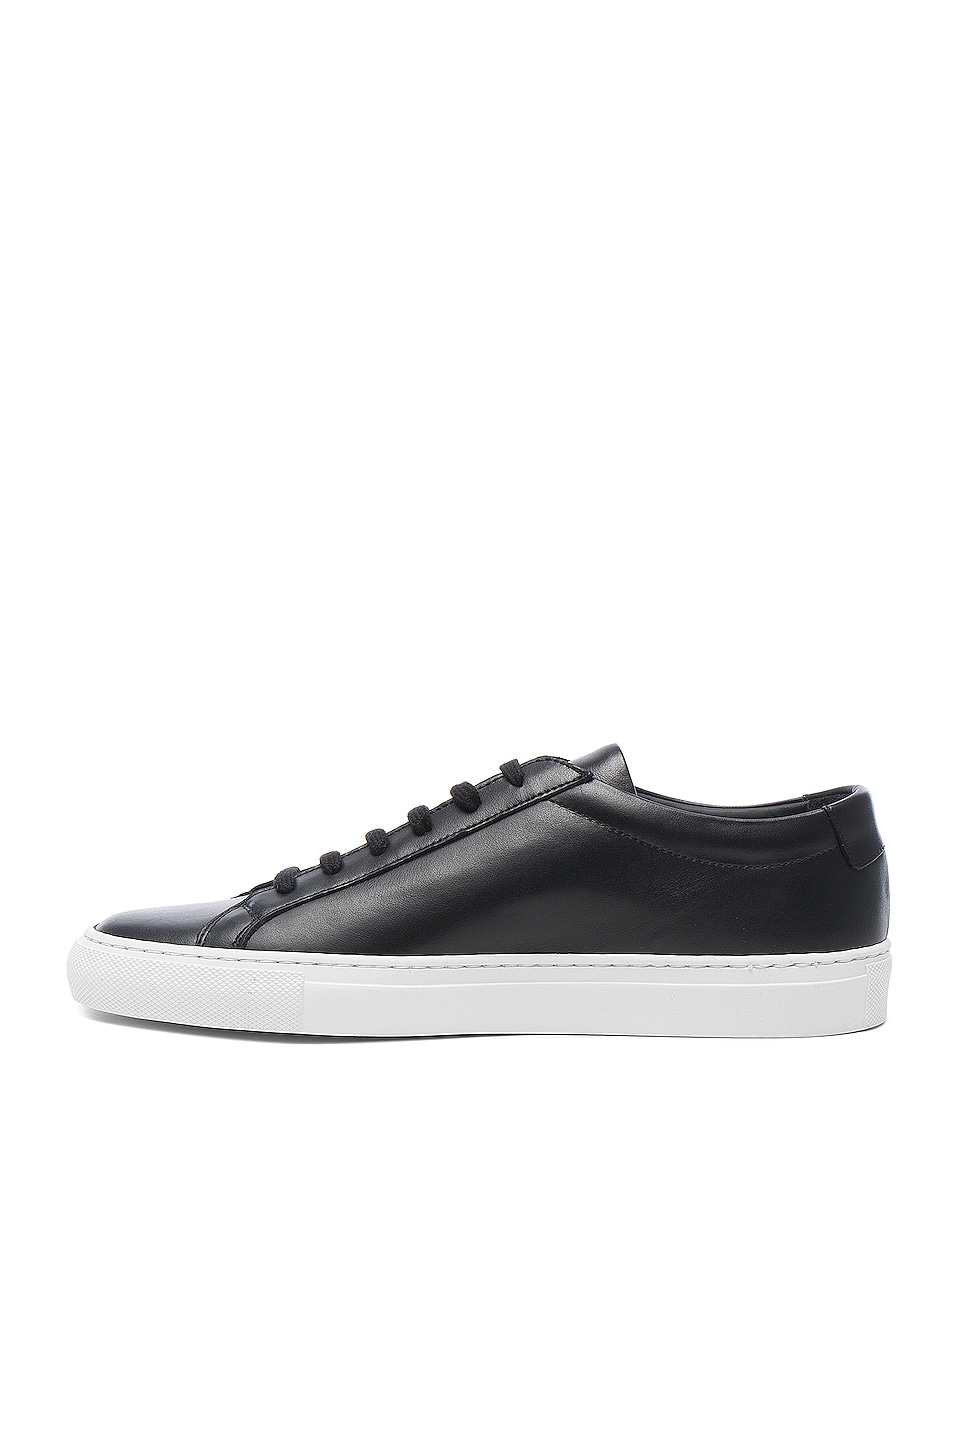 Common Projects Original Leather Achilles Low in Black | REVOLVE